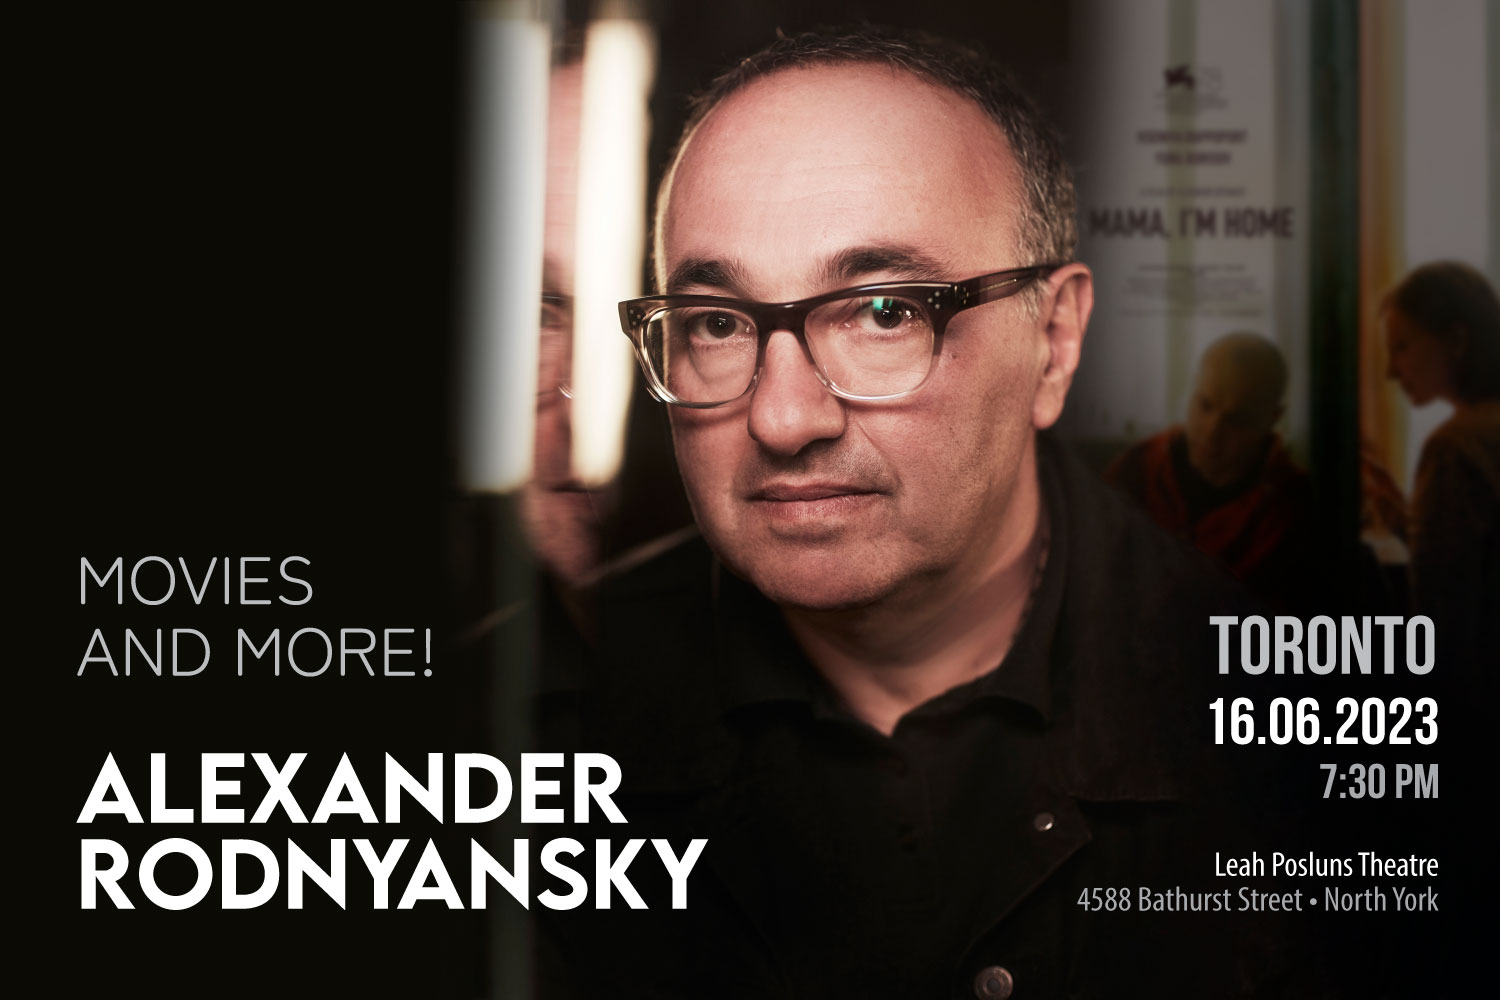 An Evening with Alexander Rodnyansky – “Movies and More!”